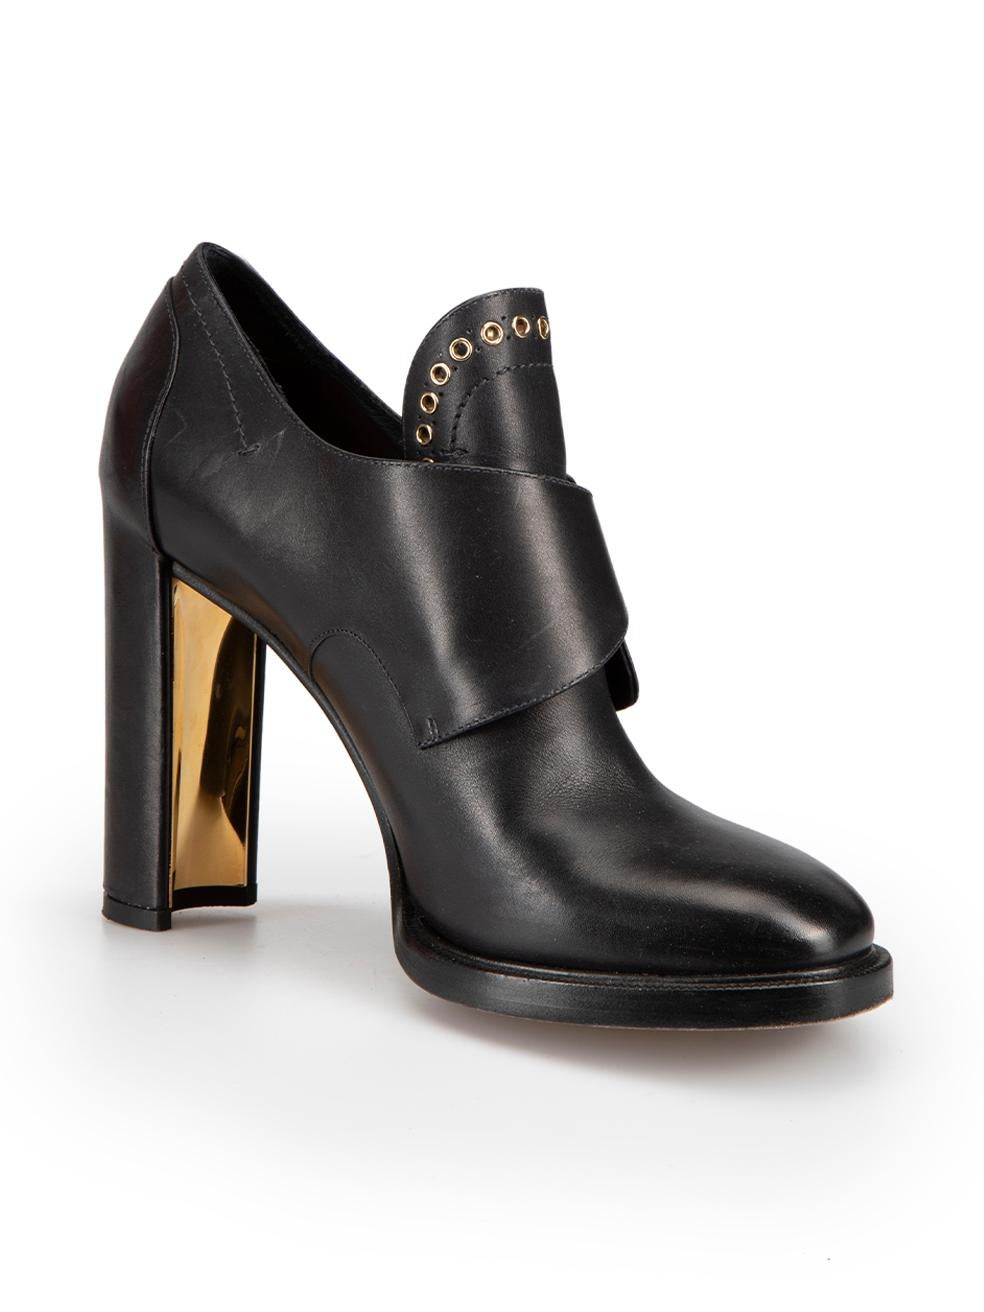 CONDITION is Very good. Minimal wear to boots is evident. Minimal wear to the left shoe with a gap between the heel-cap and heel-stem. There are also faint scuffs to the heel-stem of the right shoe on this used Salvatore Ferragamo designer resale